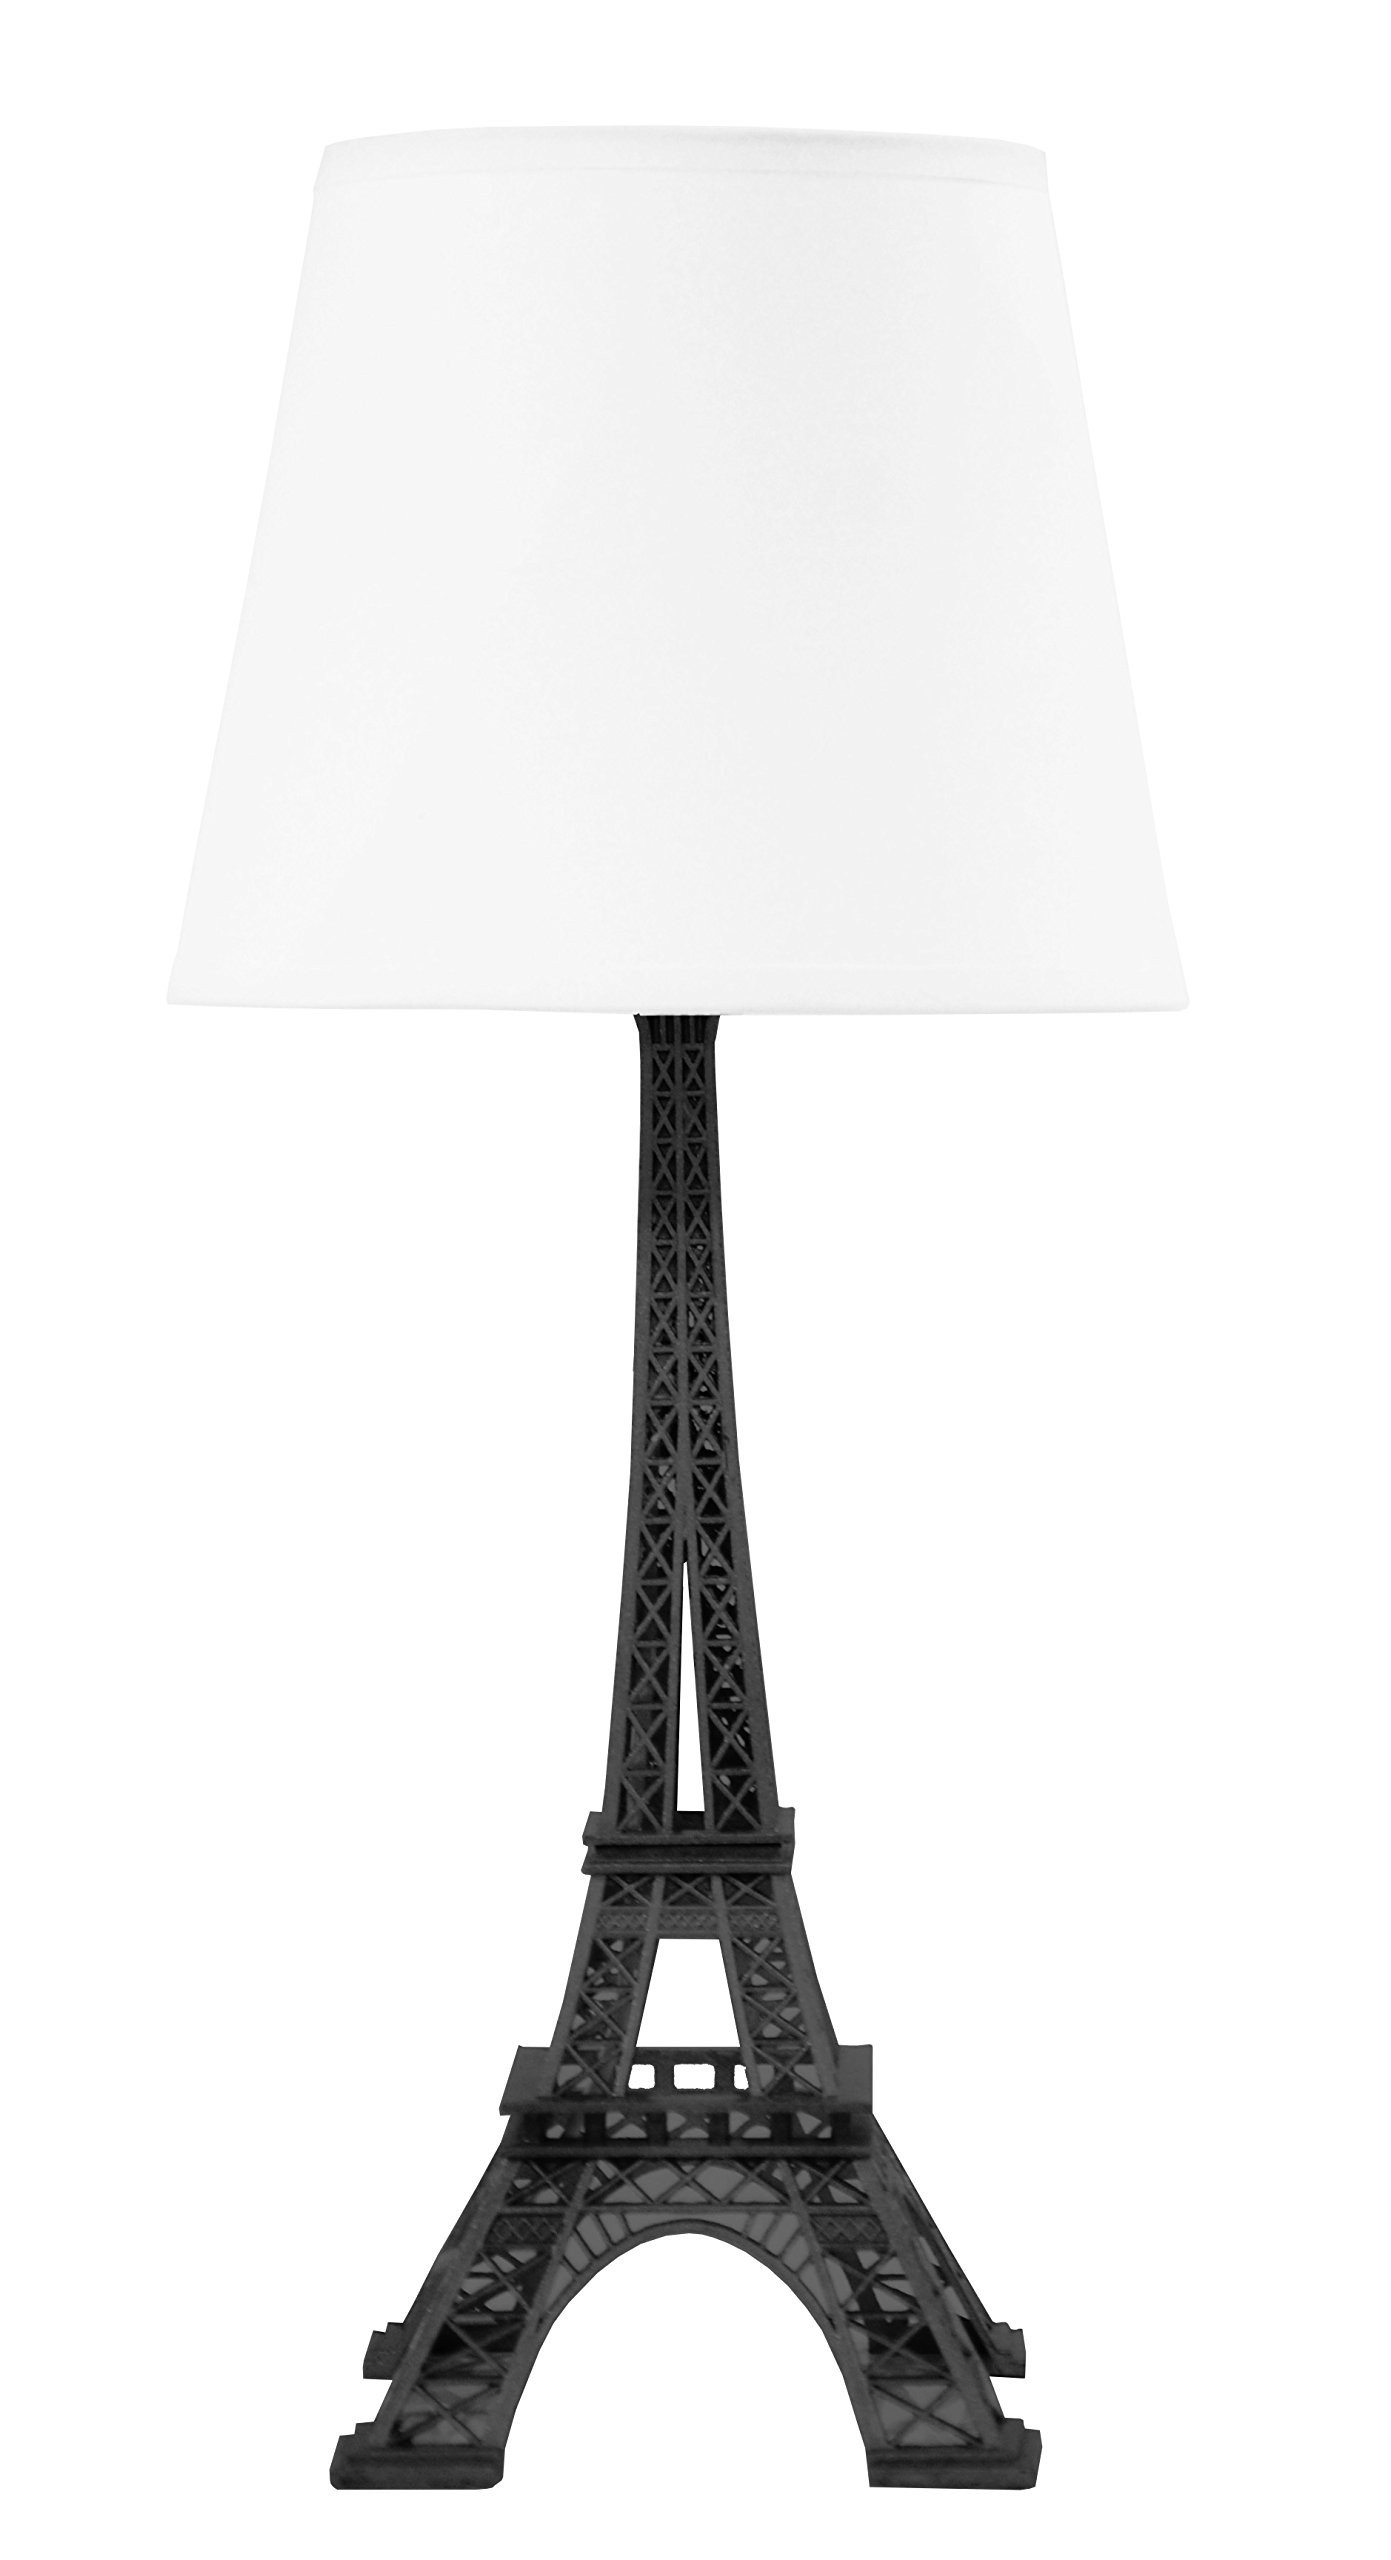 23 Awesome 4 Inch Glass Vase 2024 free download 4 inch glass vase of eiffel tower table lamp unique 8020h vases eiffel tower 24 inch for eiffel tower table lamp unique amazon yj gwl soft shaggy area rugs for bedroom kids room